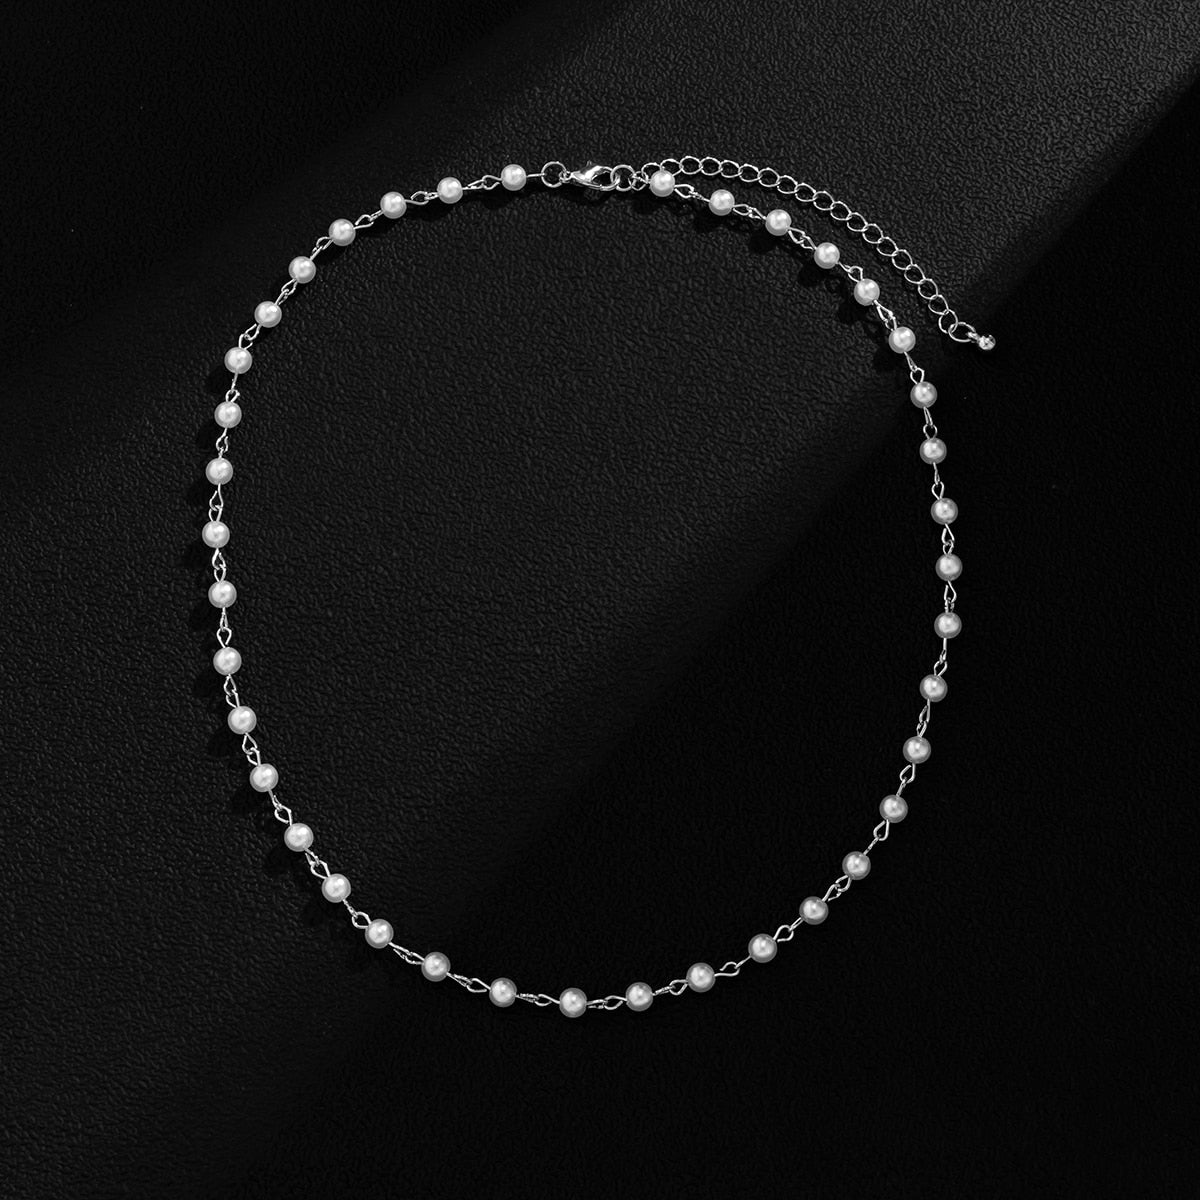 Small Pearl Beads Choker Necklace